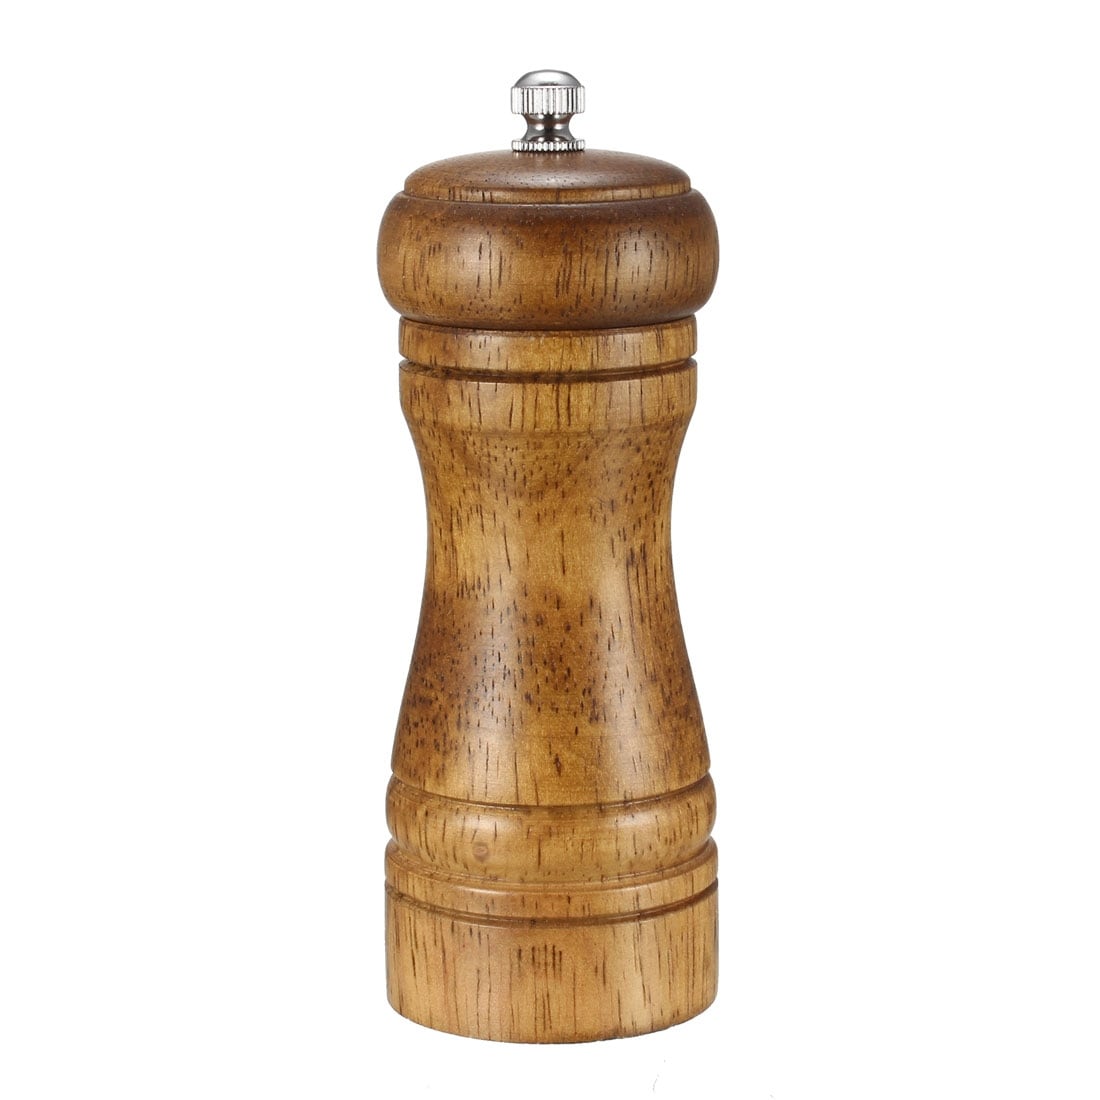 https://ak1.ostkcdn.com/images/products/is/images/direct/23acf2067c8a5b7c7d52018da0d77b37c8239e9a/Pepper-Grinder-5-inch-Solid-Wood-Adjustable-Coarseness-Salt-and-Pepper-Mill.jpg